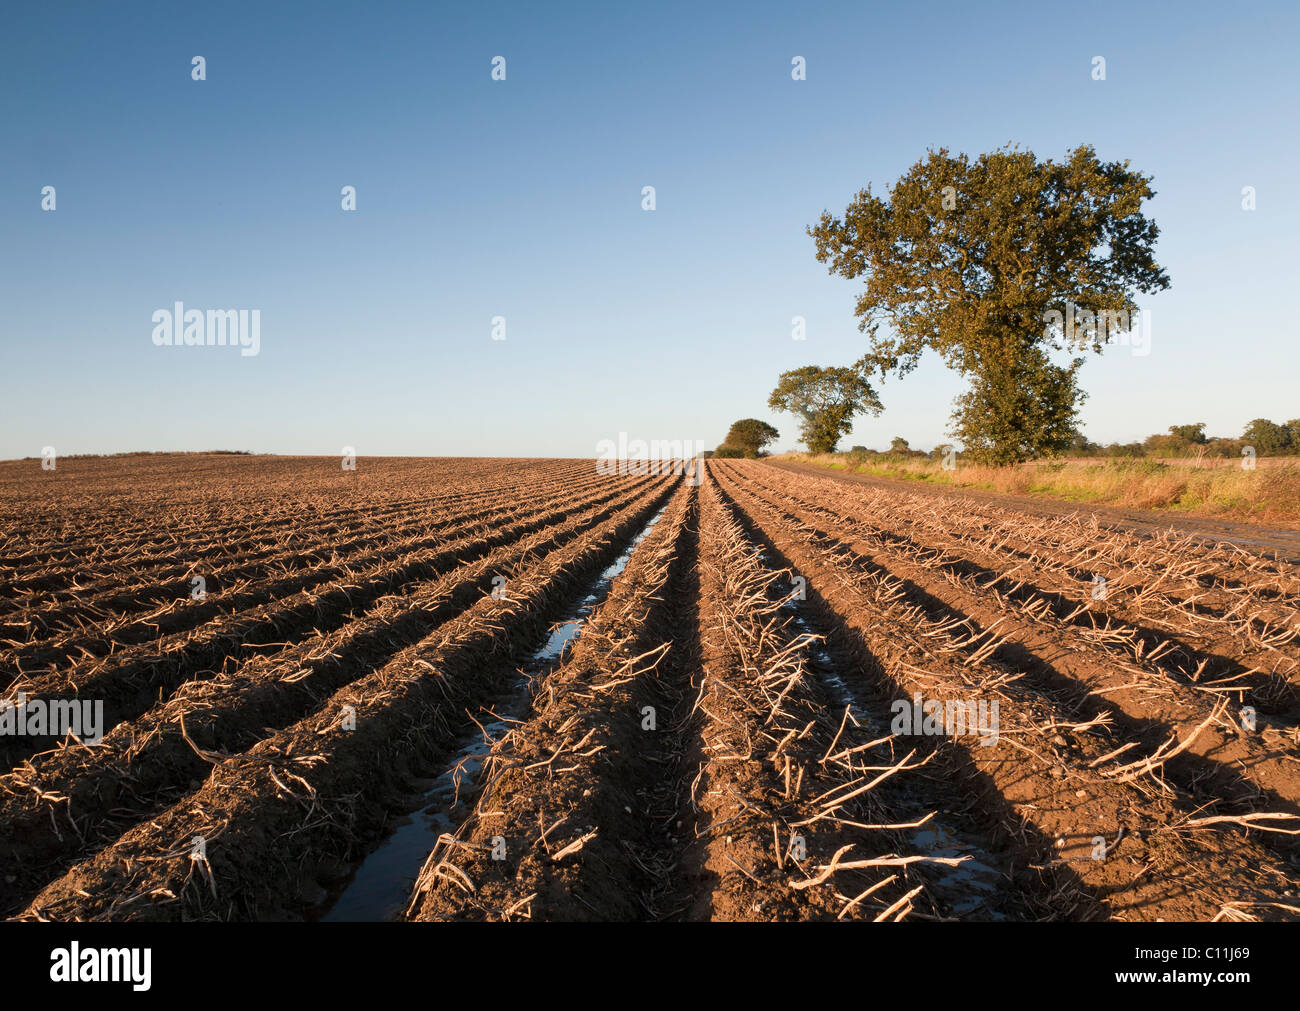 A field of potatoes ready to be harvested on a farm in the UK Stock Photo